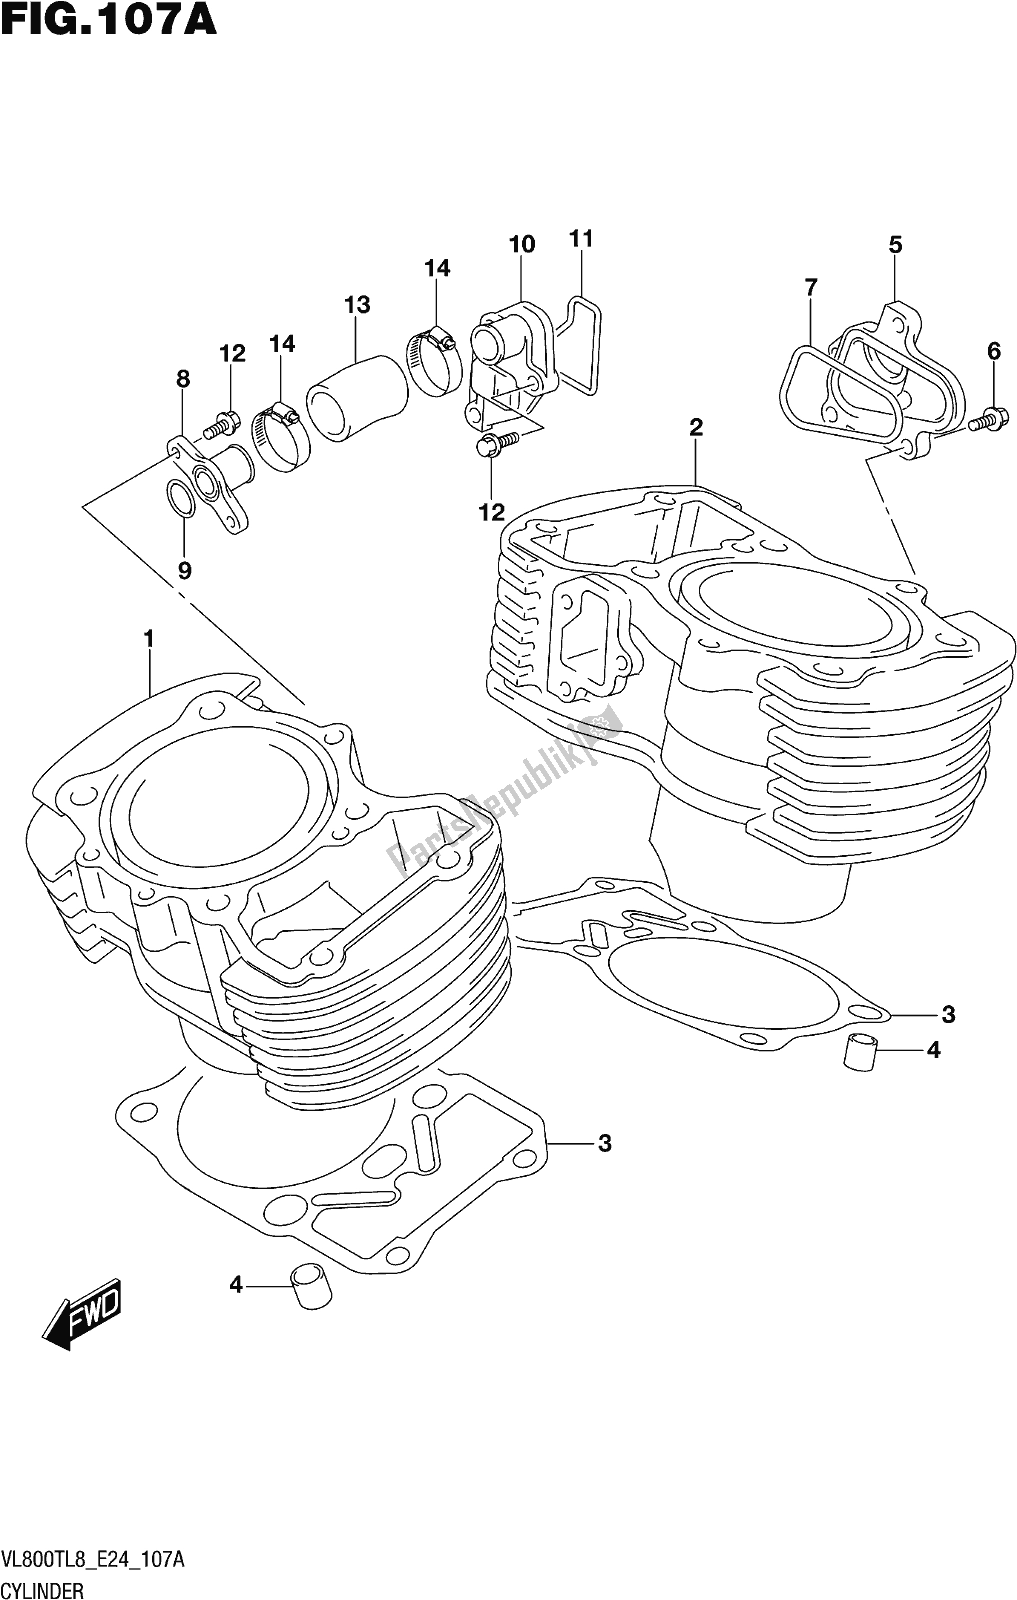 All parts for the Fig. 107a Cylinder of the Suzuki VL 800T 2018